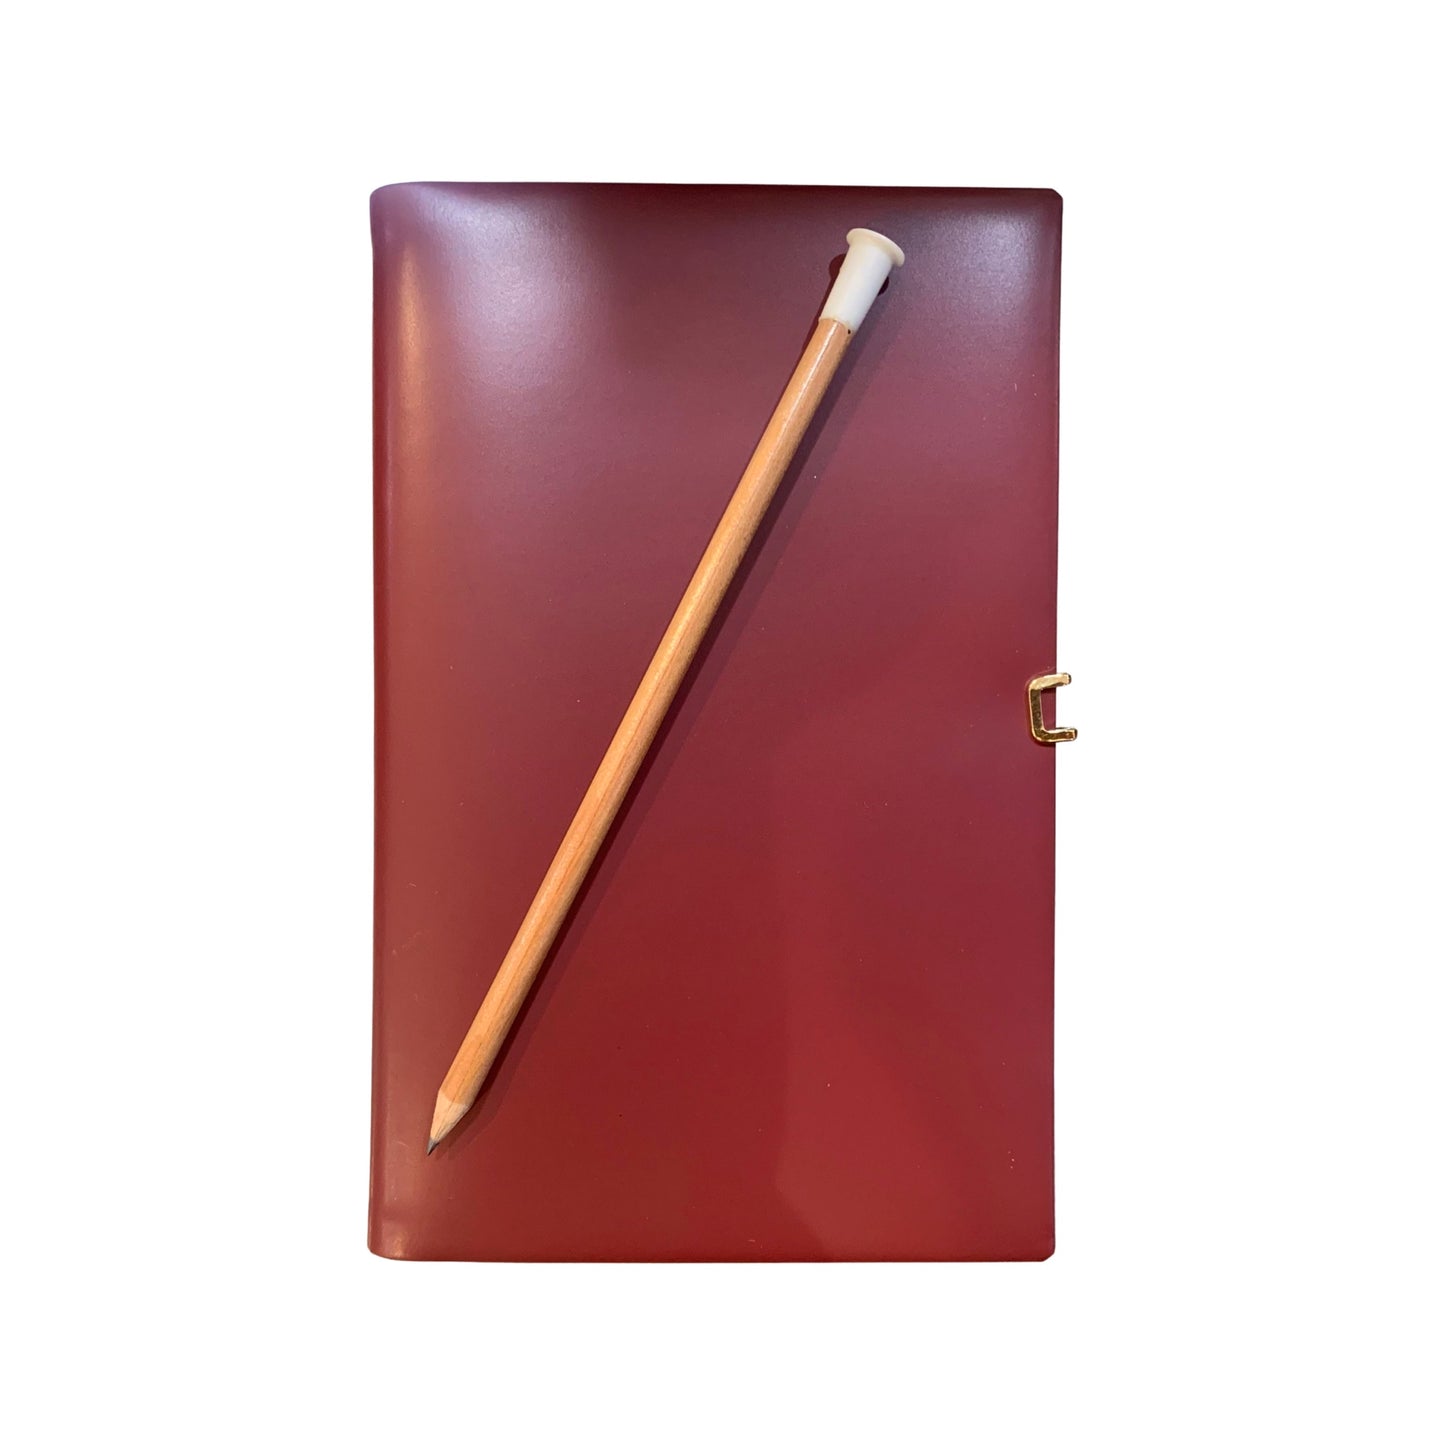 Address Book | 5 by 3 inches | Calf Leather | Pencil and Gold Clasp | A53CJC